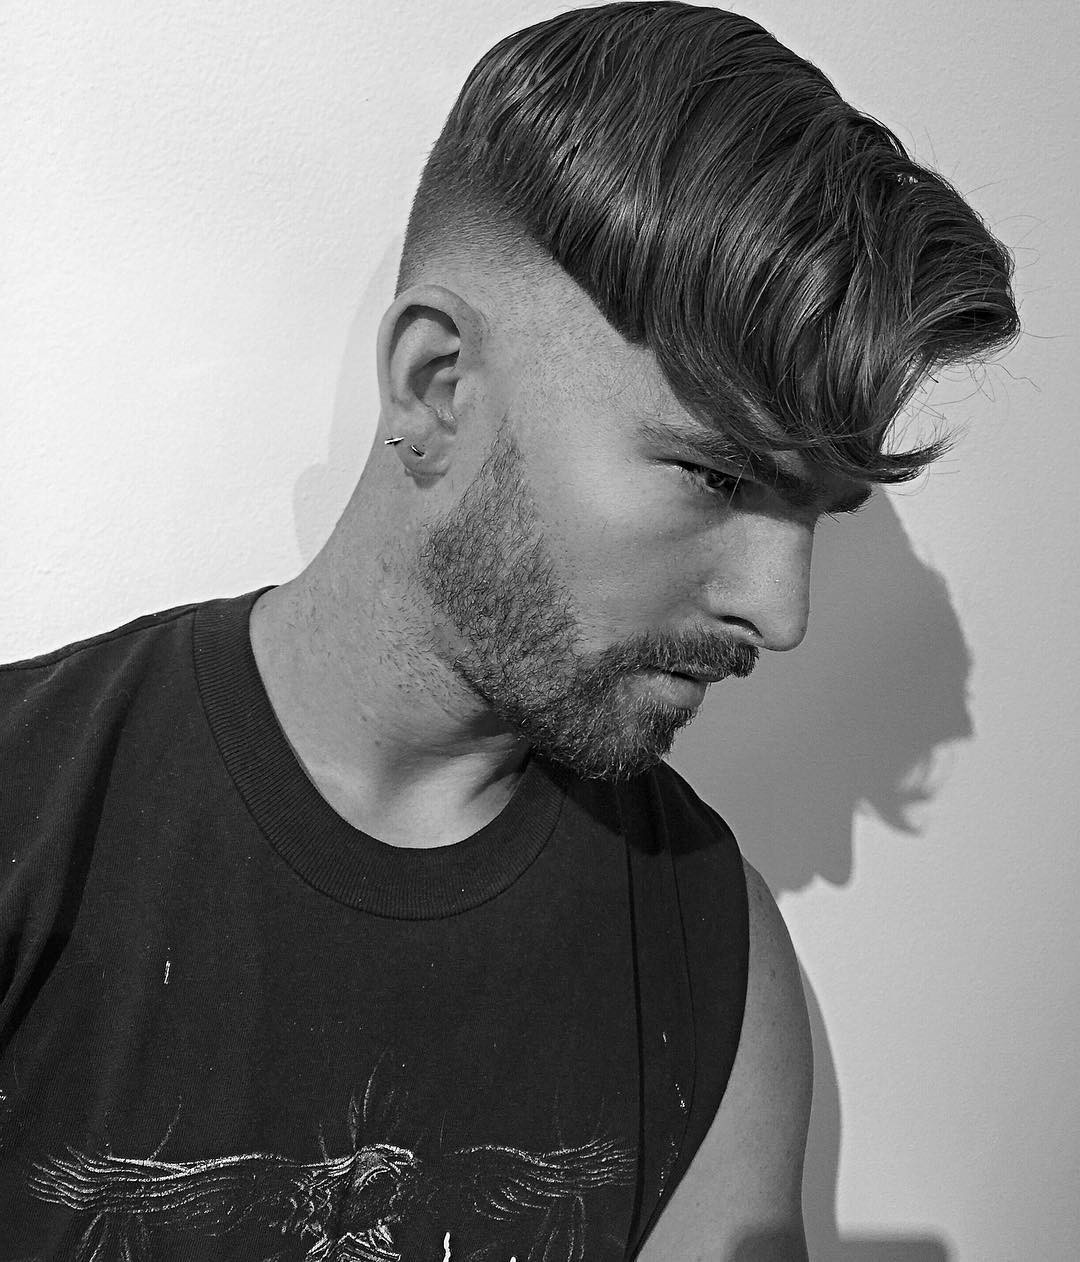 Hairstyles With Undercuts
 Top 21 Undercut Haircuts Hairstyles For Men 2020 Update